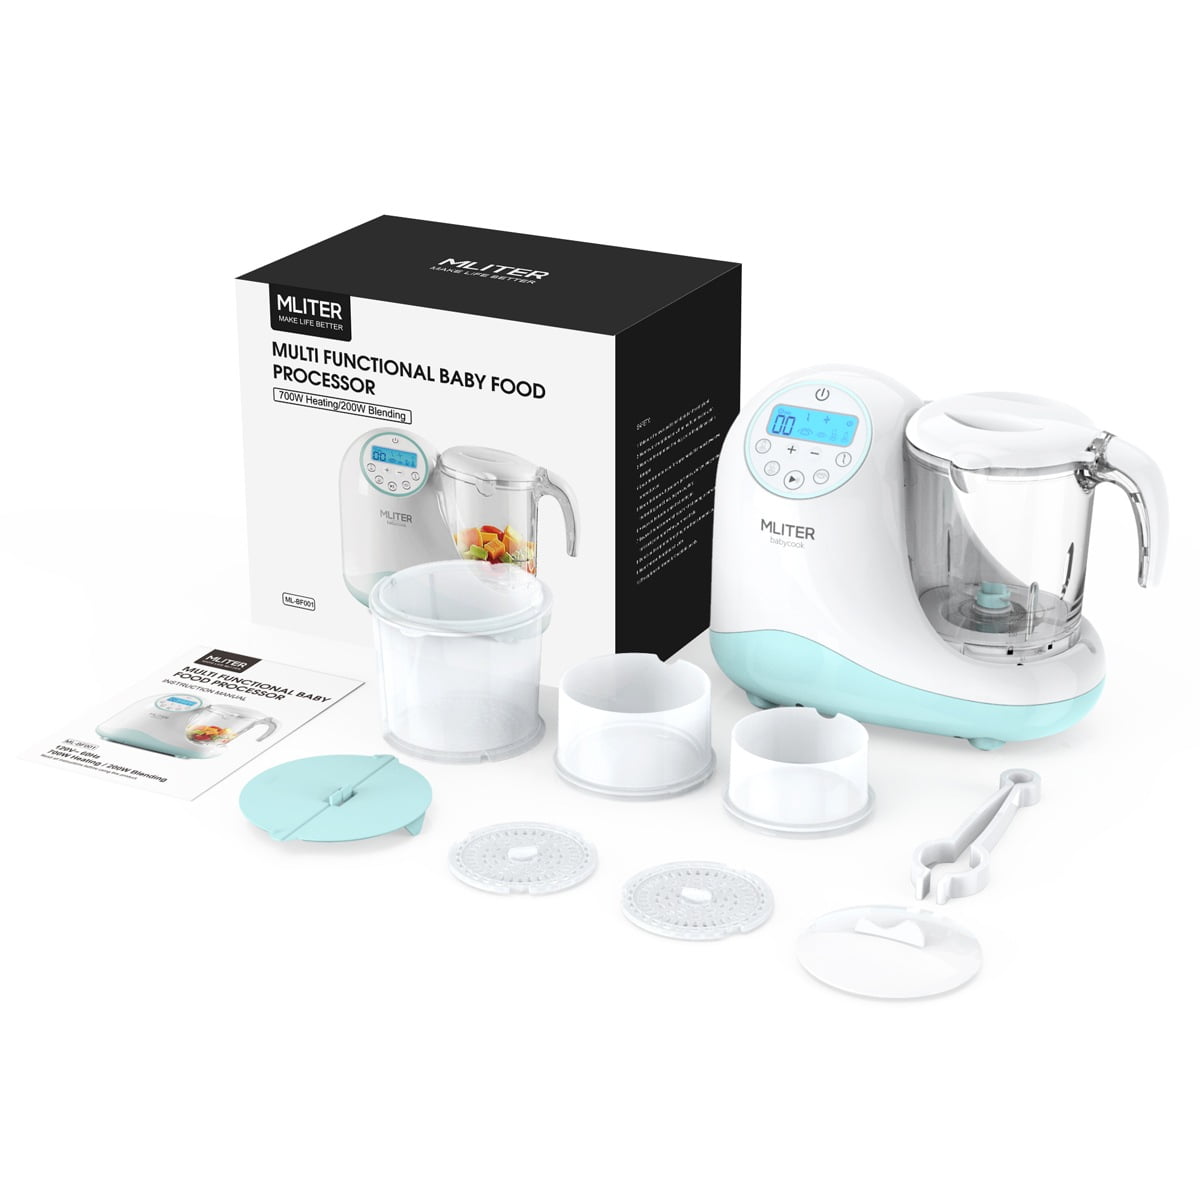 Just in! Chef Handy 5 in 1 Baby Food Maker w/ blender/ steamer/ warmer &  more! Retail: $120, our price: $39! #lilposhresale